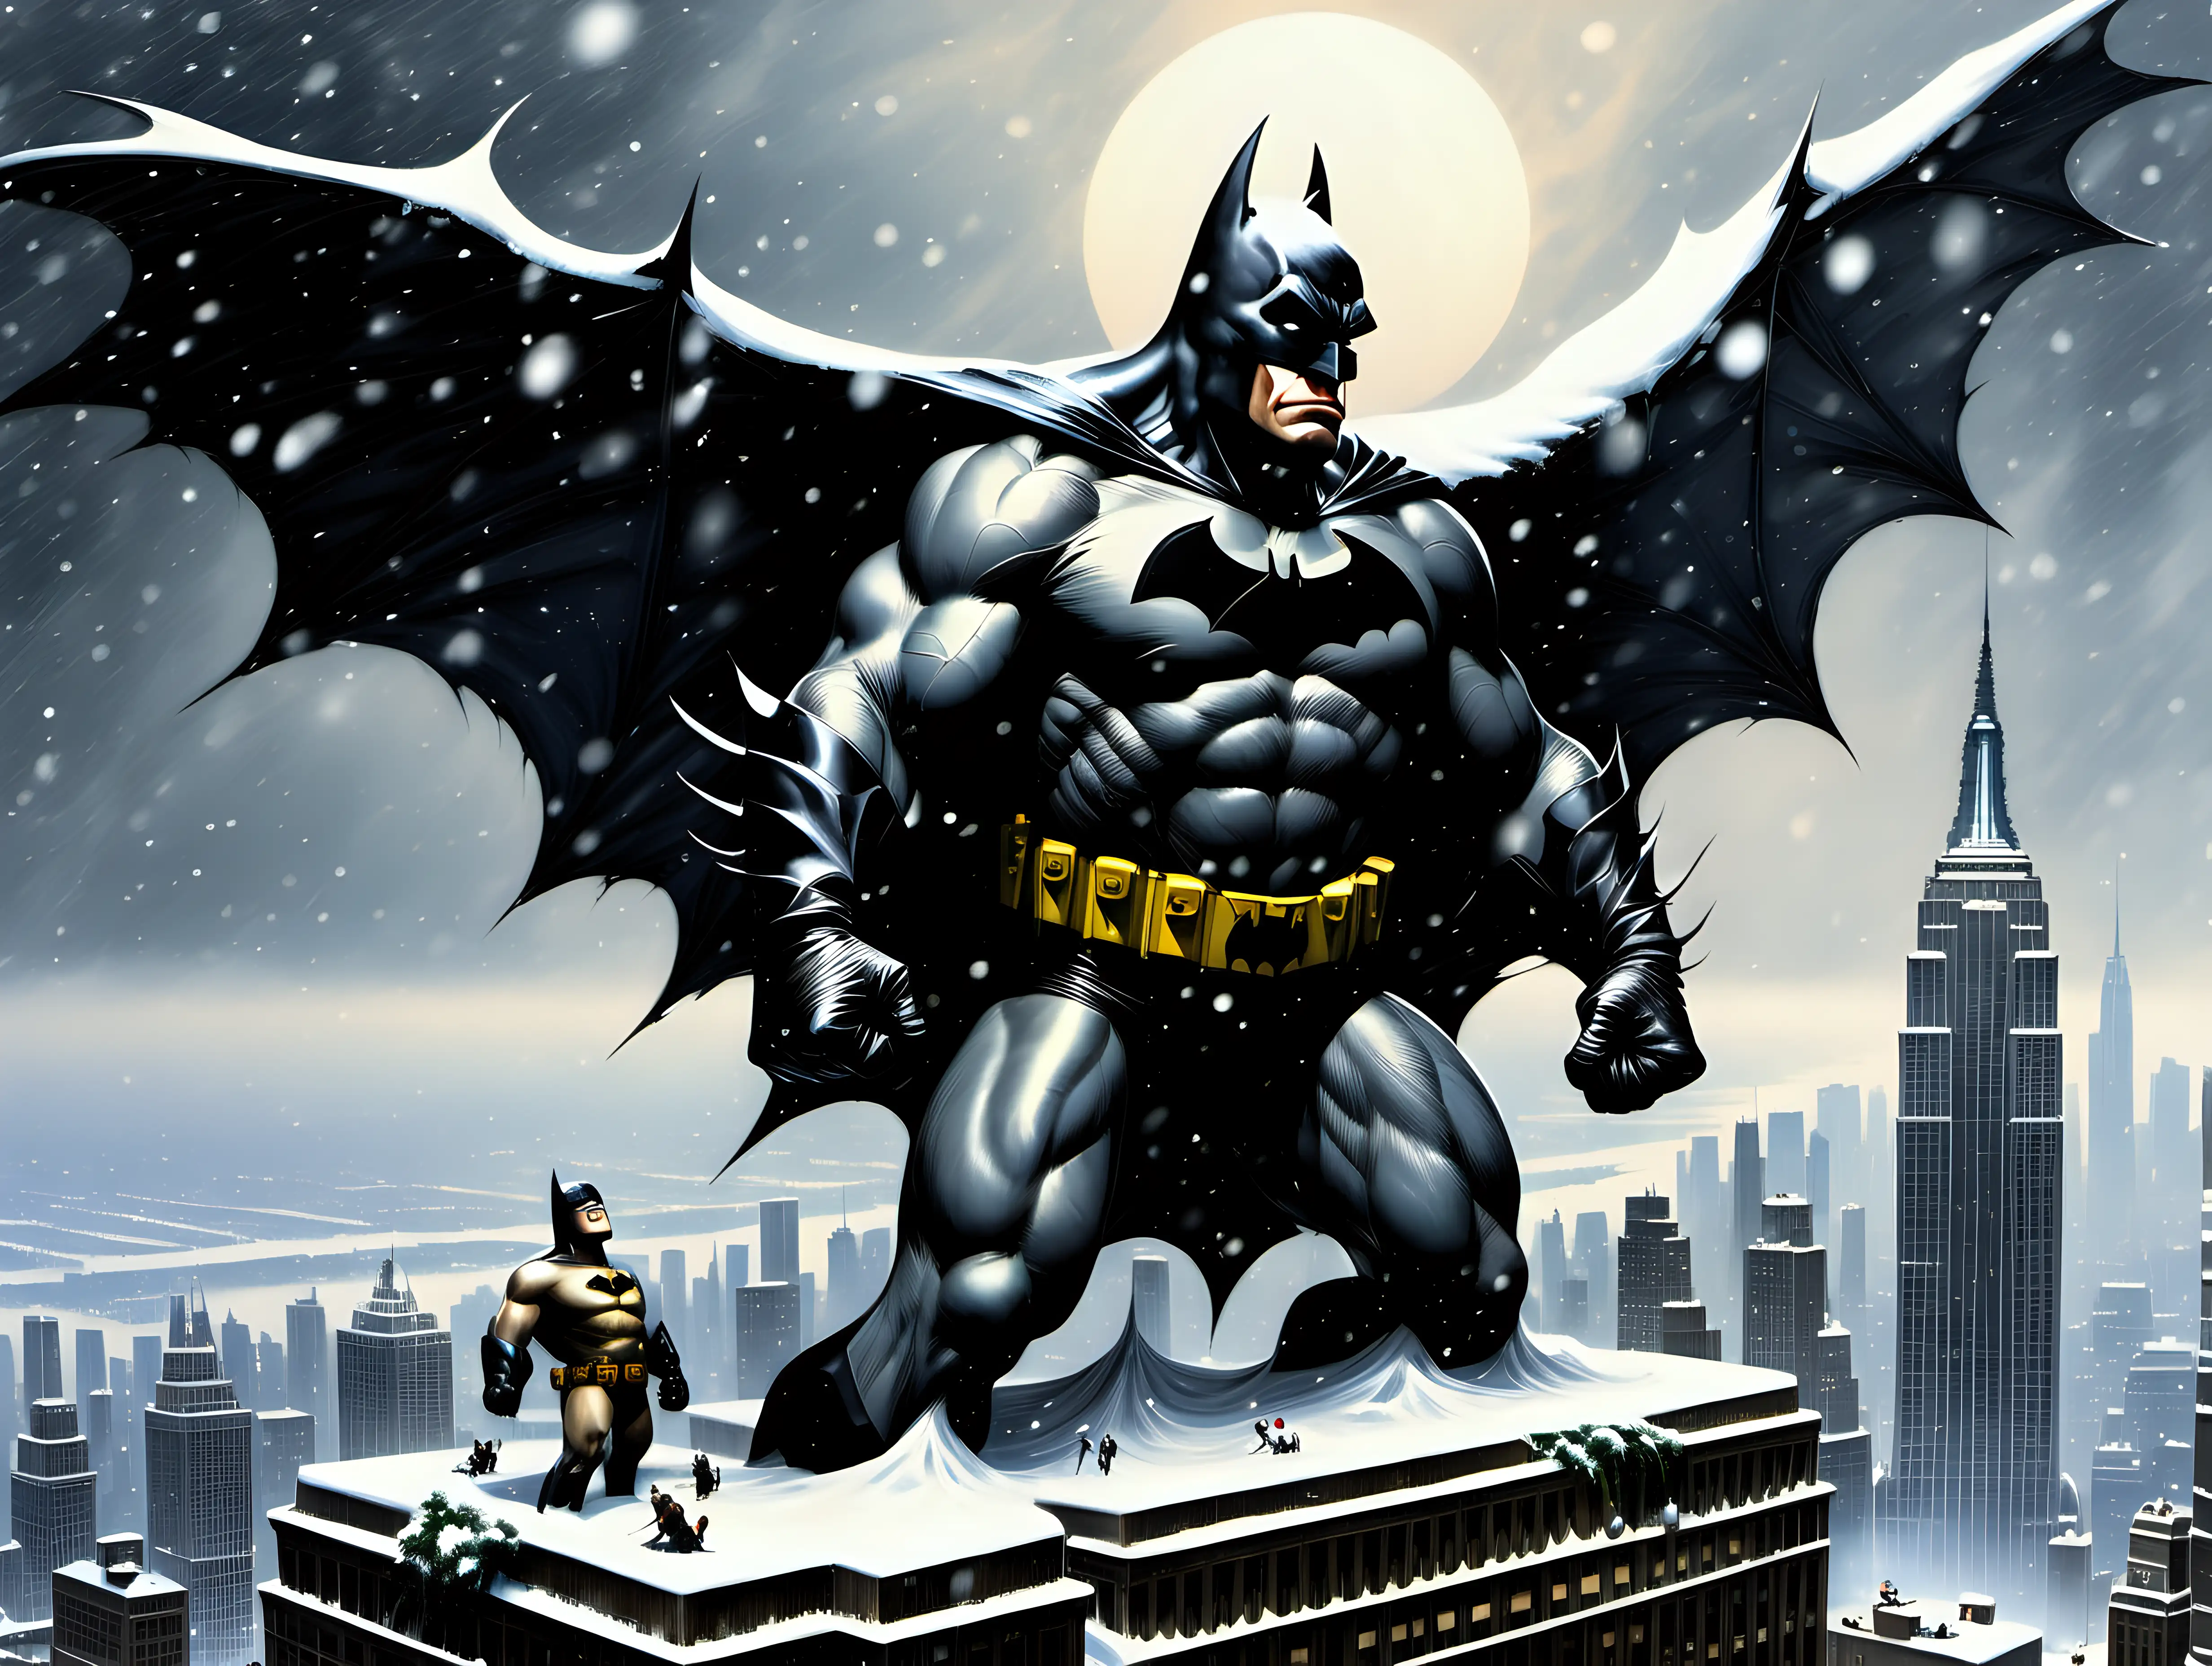 Batman and King Kong on the top of Empire State building in a snow storm Frank Frazetta style